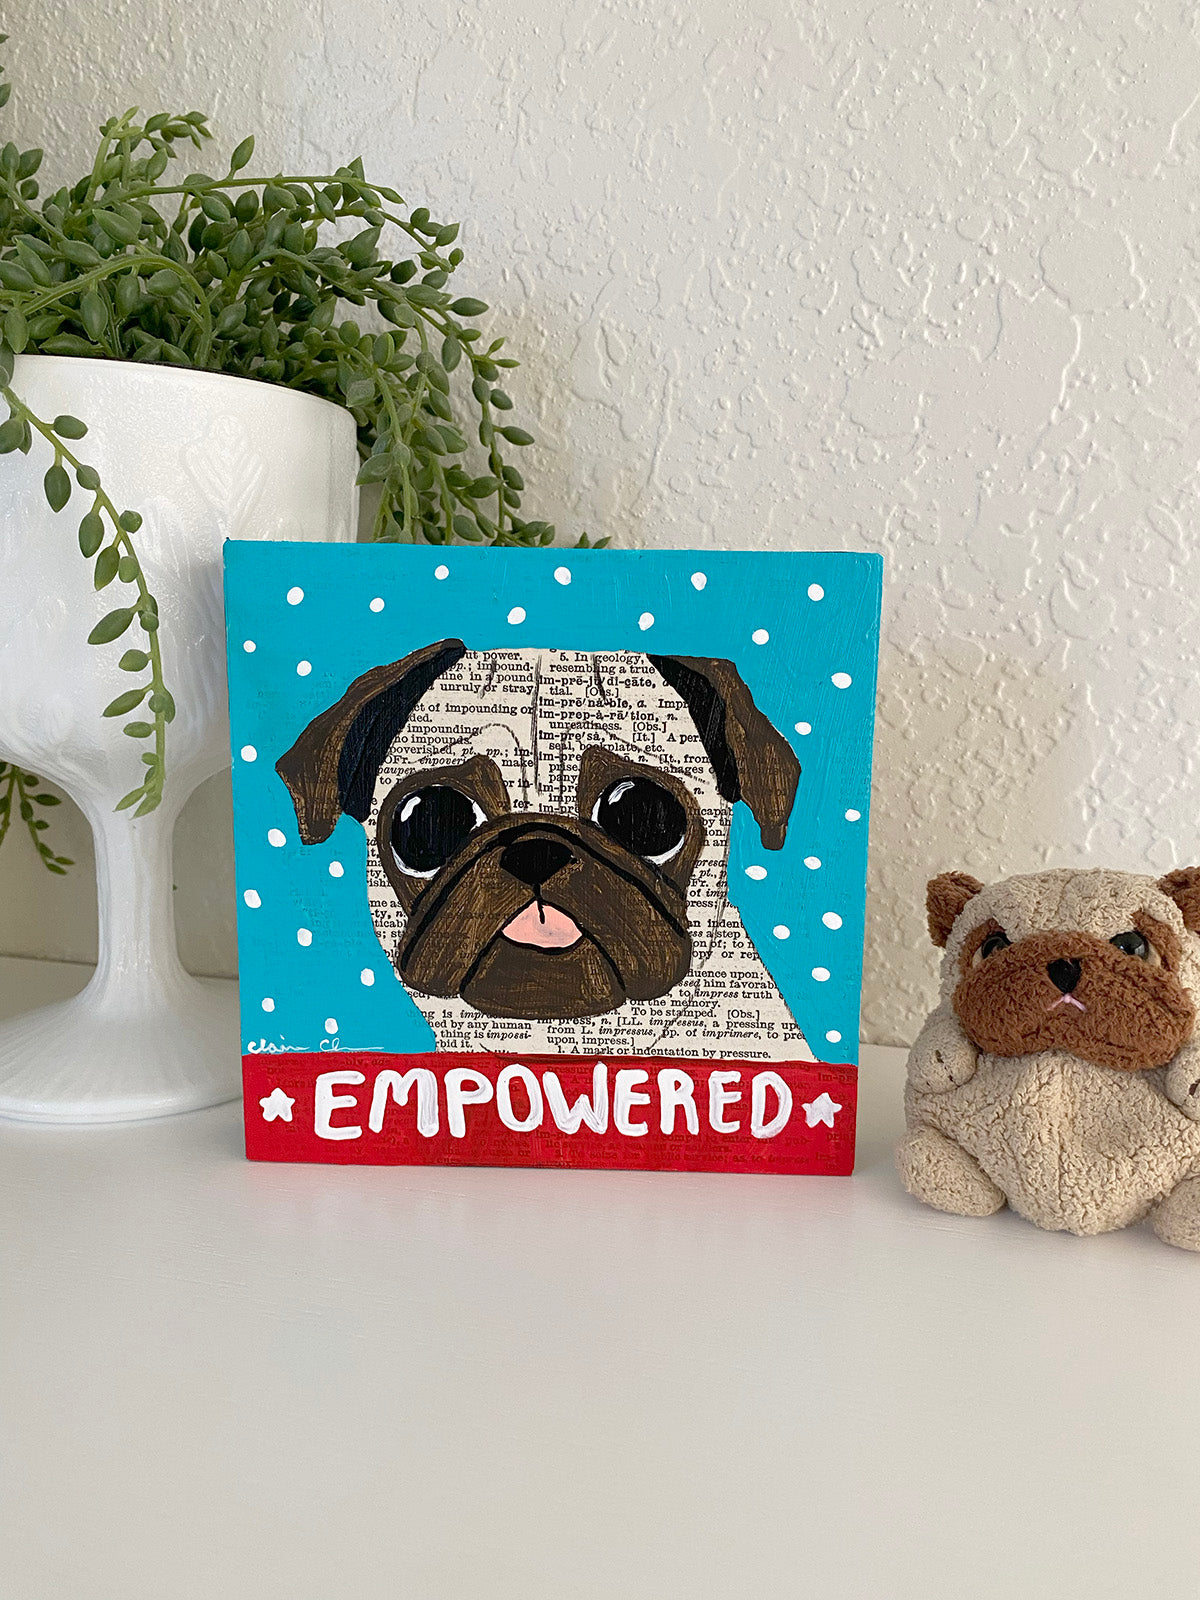 Empowered - Original Word of the Year Painting